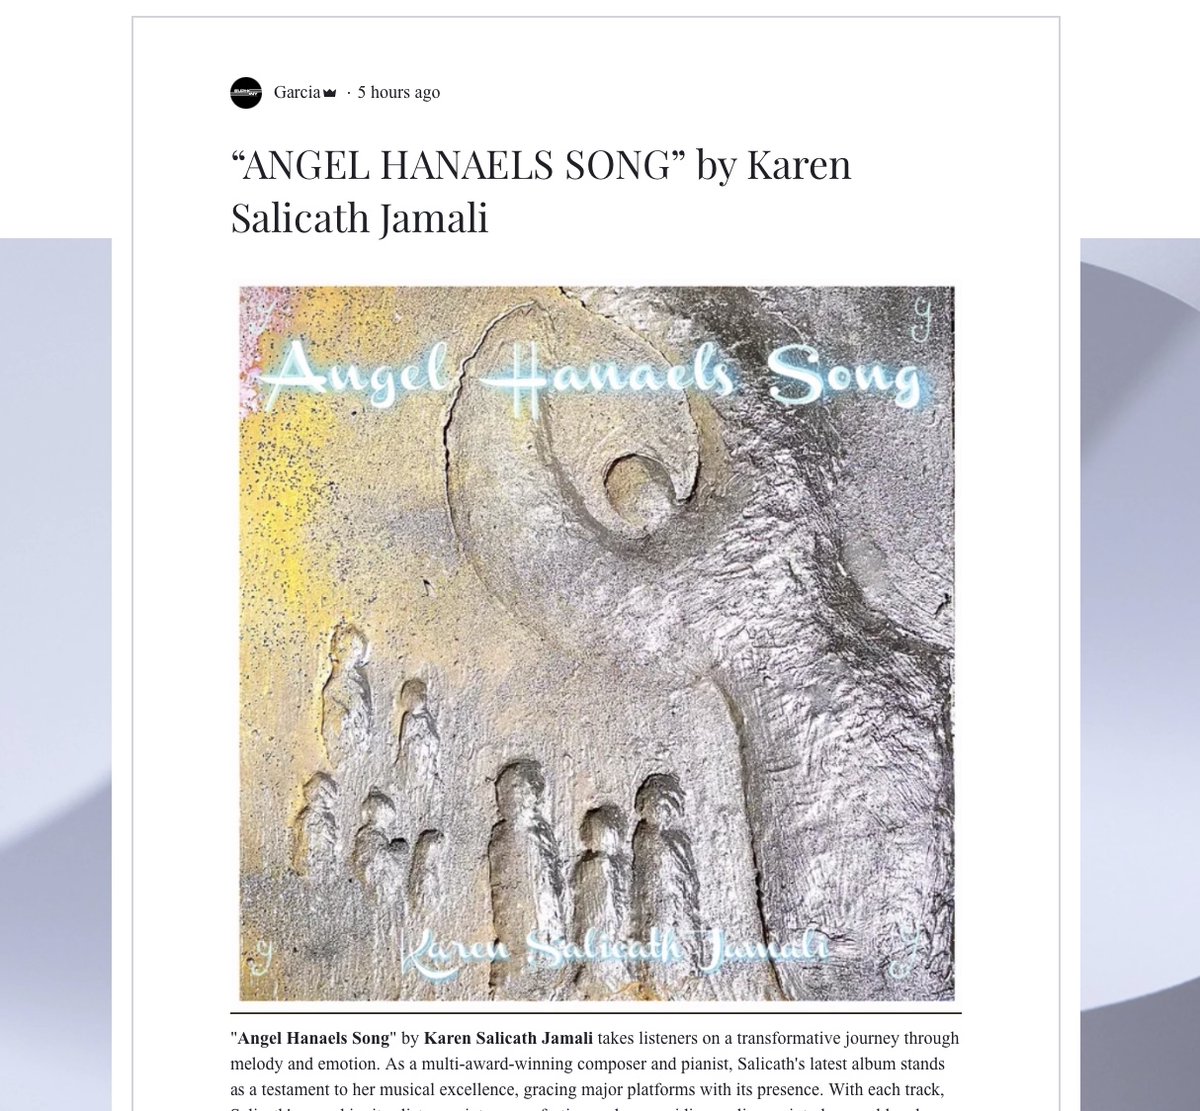 I'm so thankful for this new album review that came in today from Euphonoy Bolg . About my new album Angel Hanaels Song. Read it here:
euphonyblognet.com/post/angel-han…

#news #Album #review #Piano #classicalmusic #newagemusic #KarenSalicathjamali  #newmusic